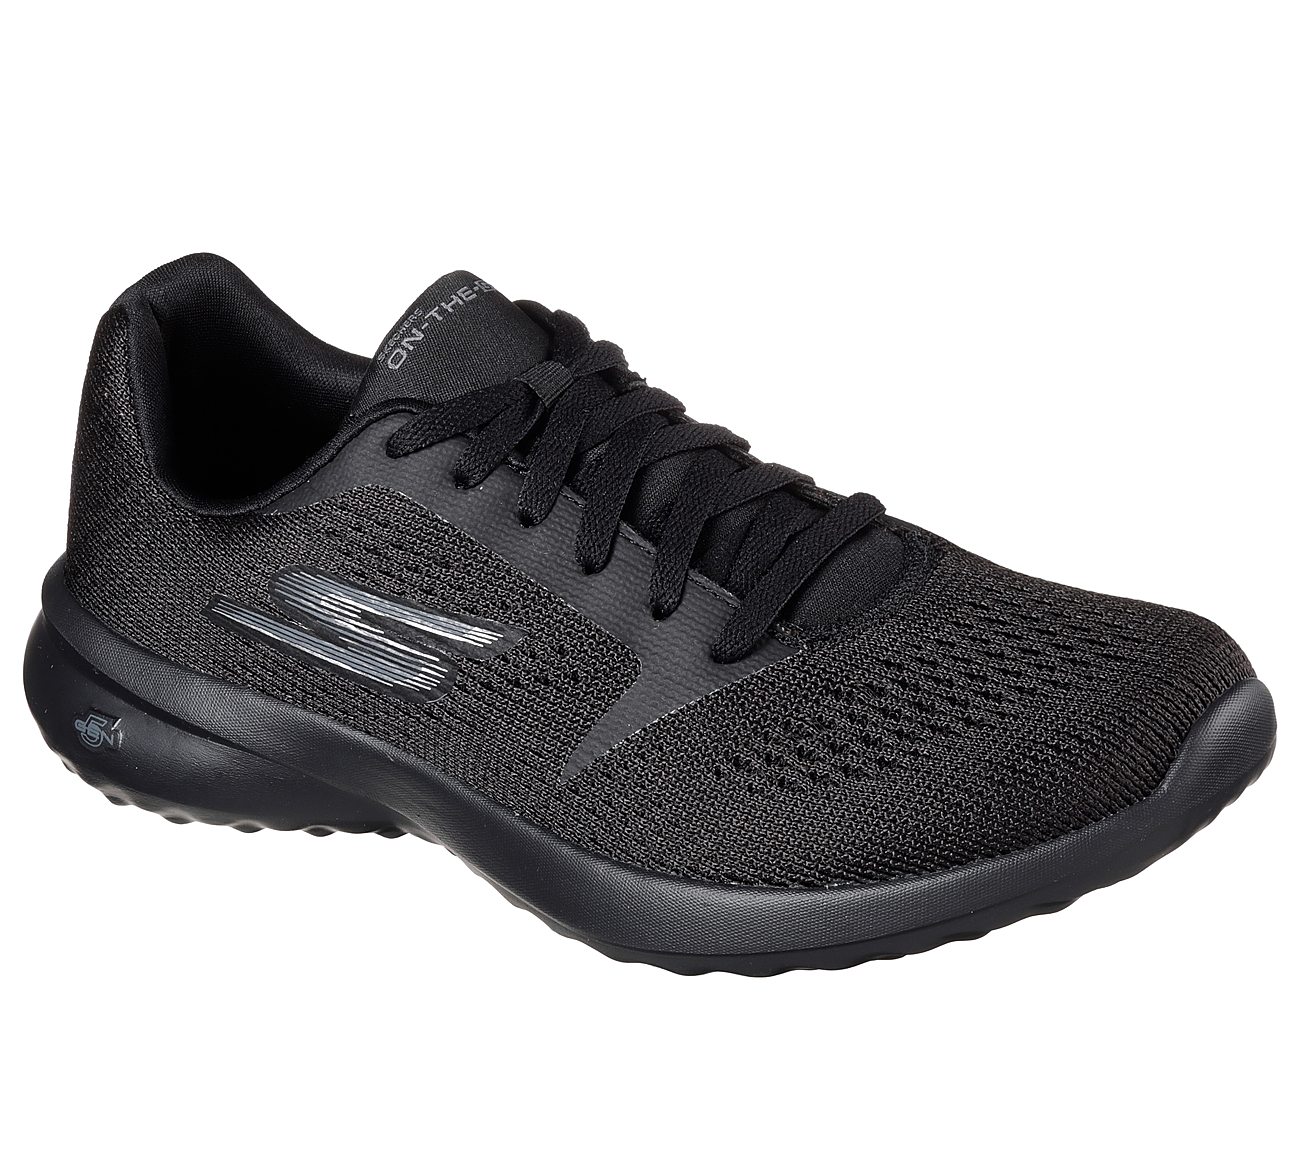 skechers on the go sale